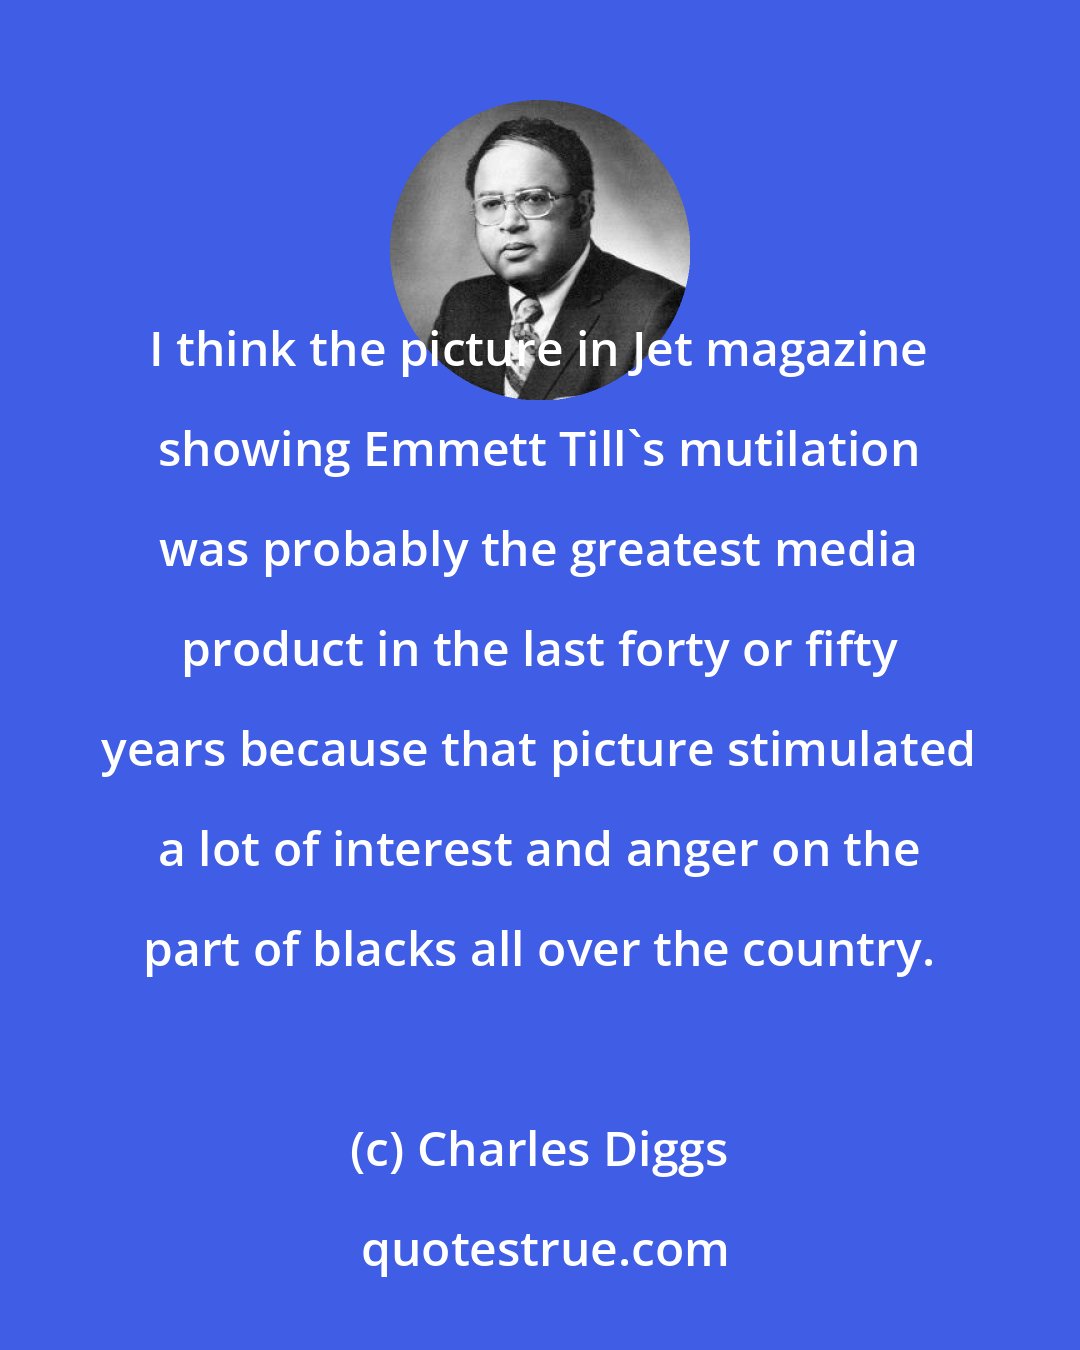 Charles Diggs: I think the picture in Jet magazine showing Emmett Till's mutilation was probably the greatest media product in the last forty or fifty years because that picture stimulated a lot of interest and anger on the part of blacks all over the country.